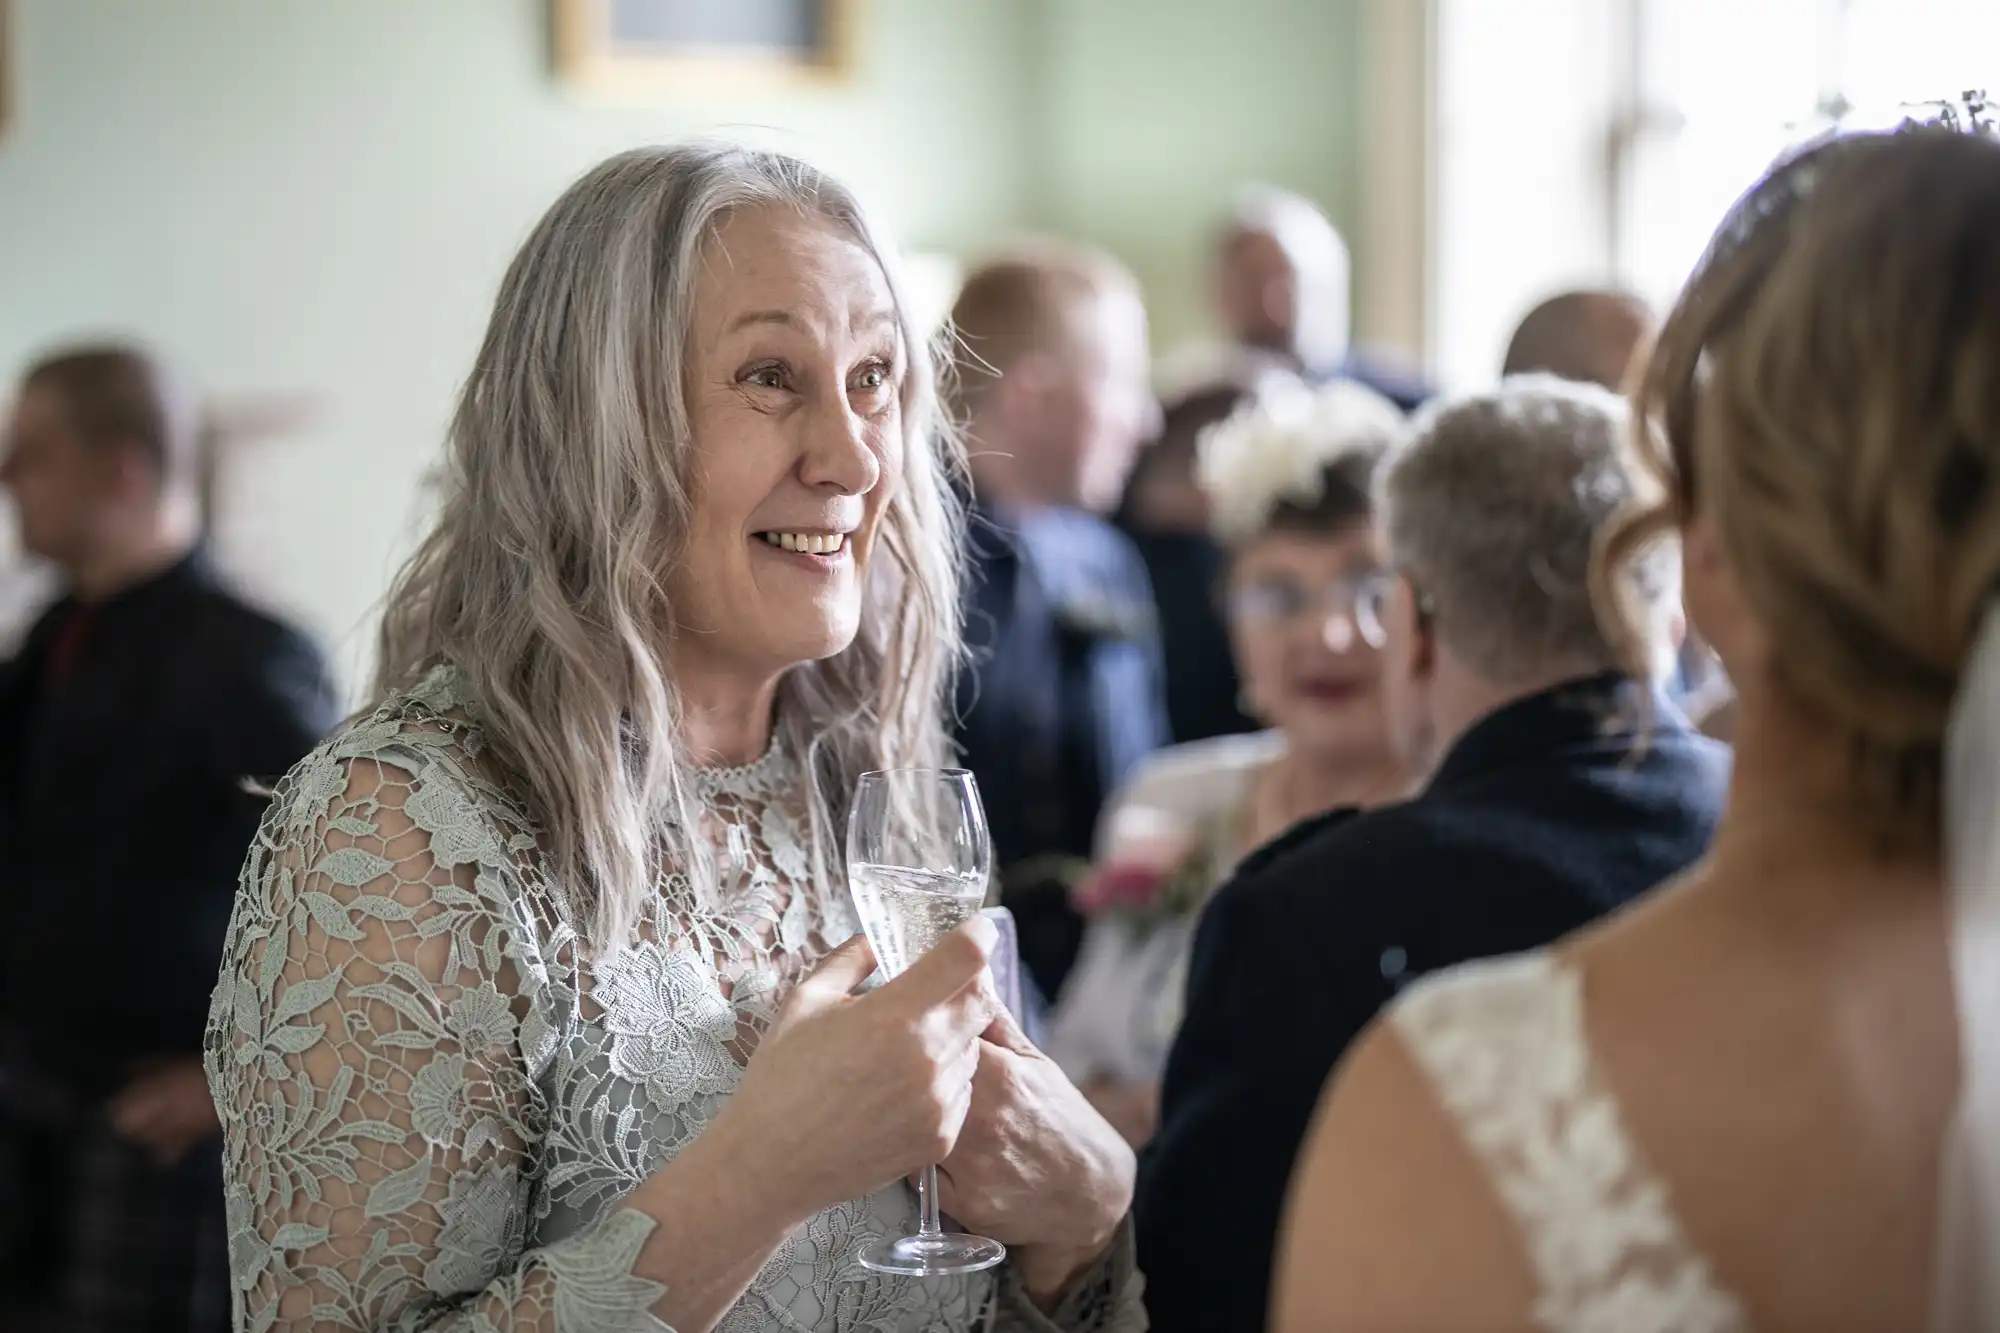 An elderly woman with long gray hair, wearing a lace dress, holds a glass of wine and smiles while talking to another person at an indoor gathering.